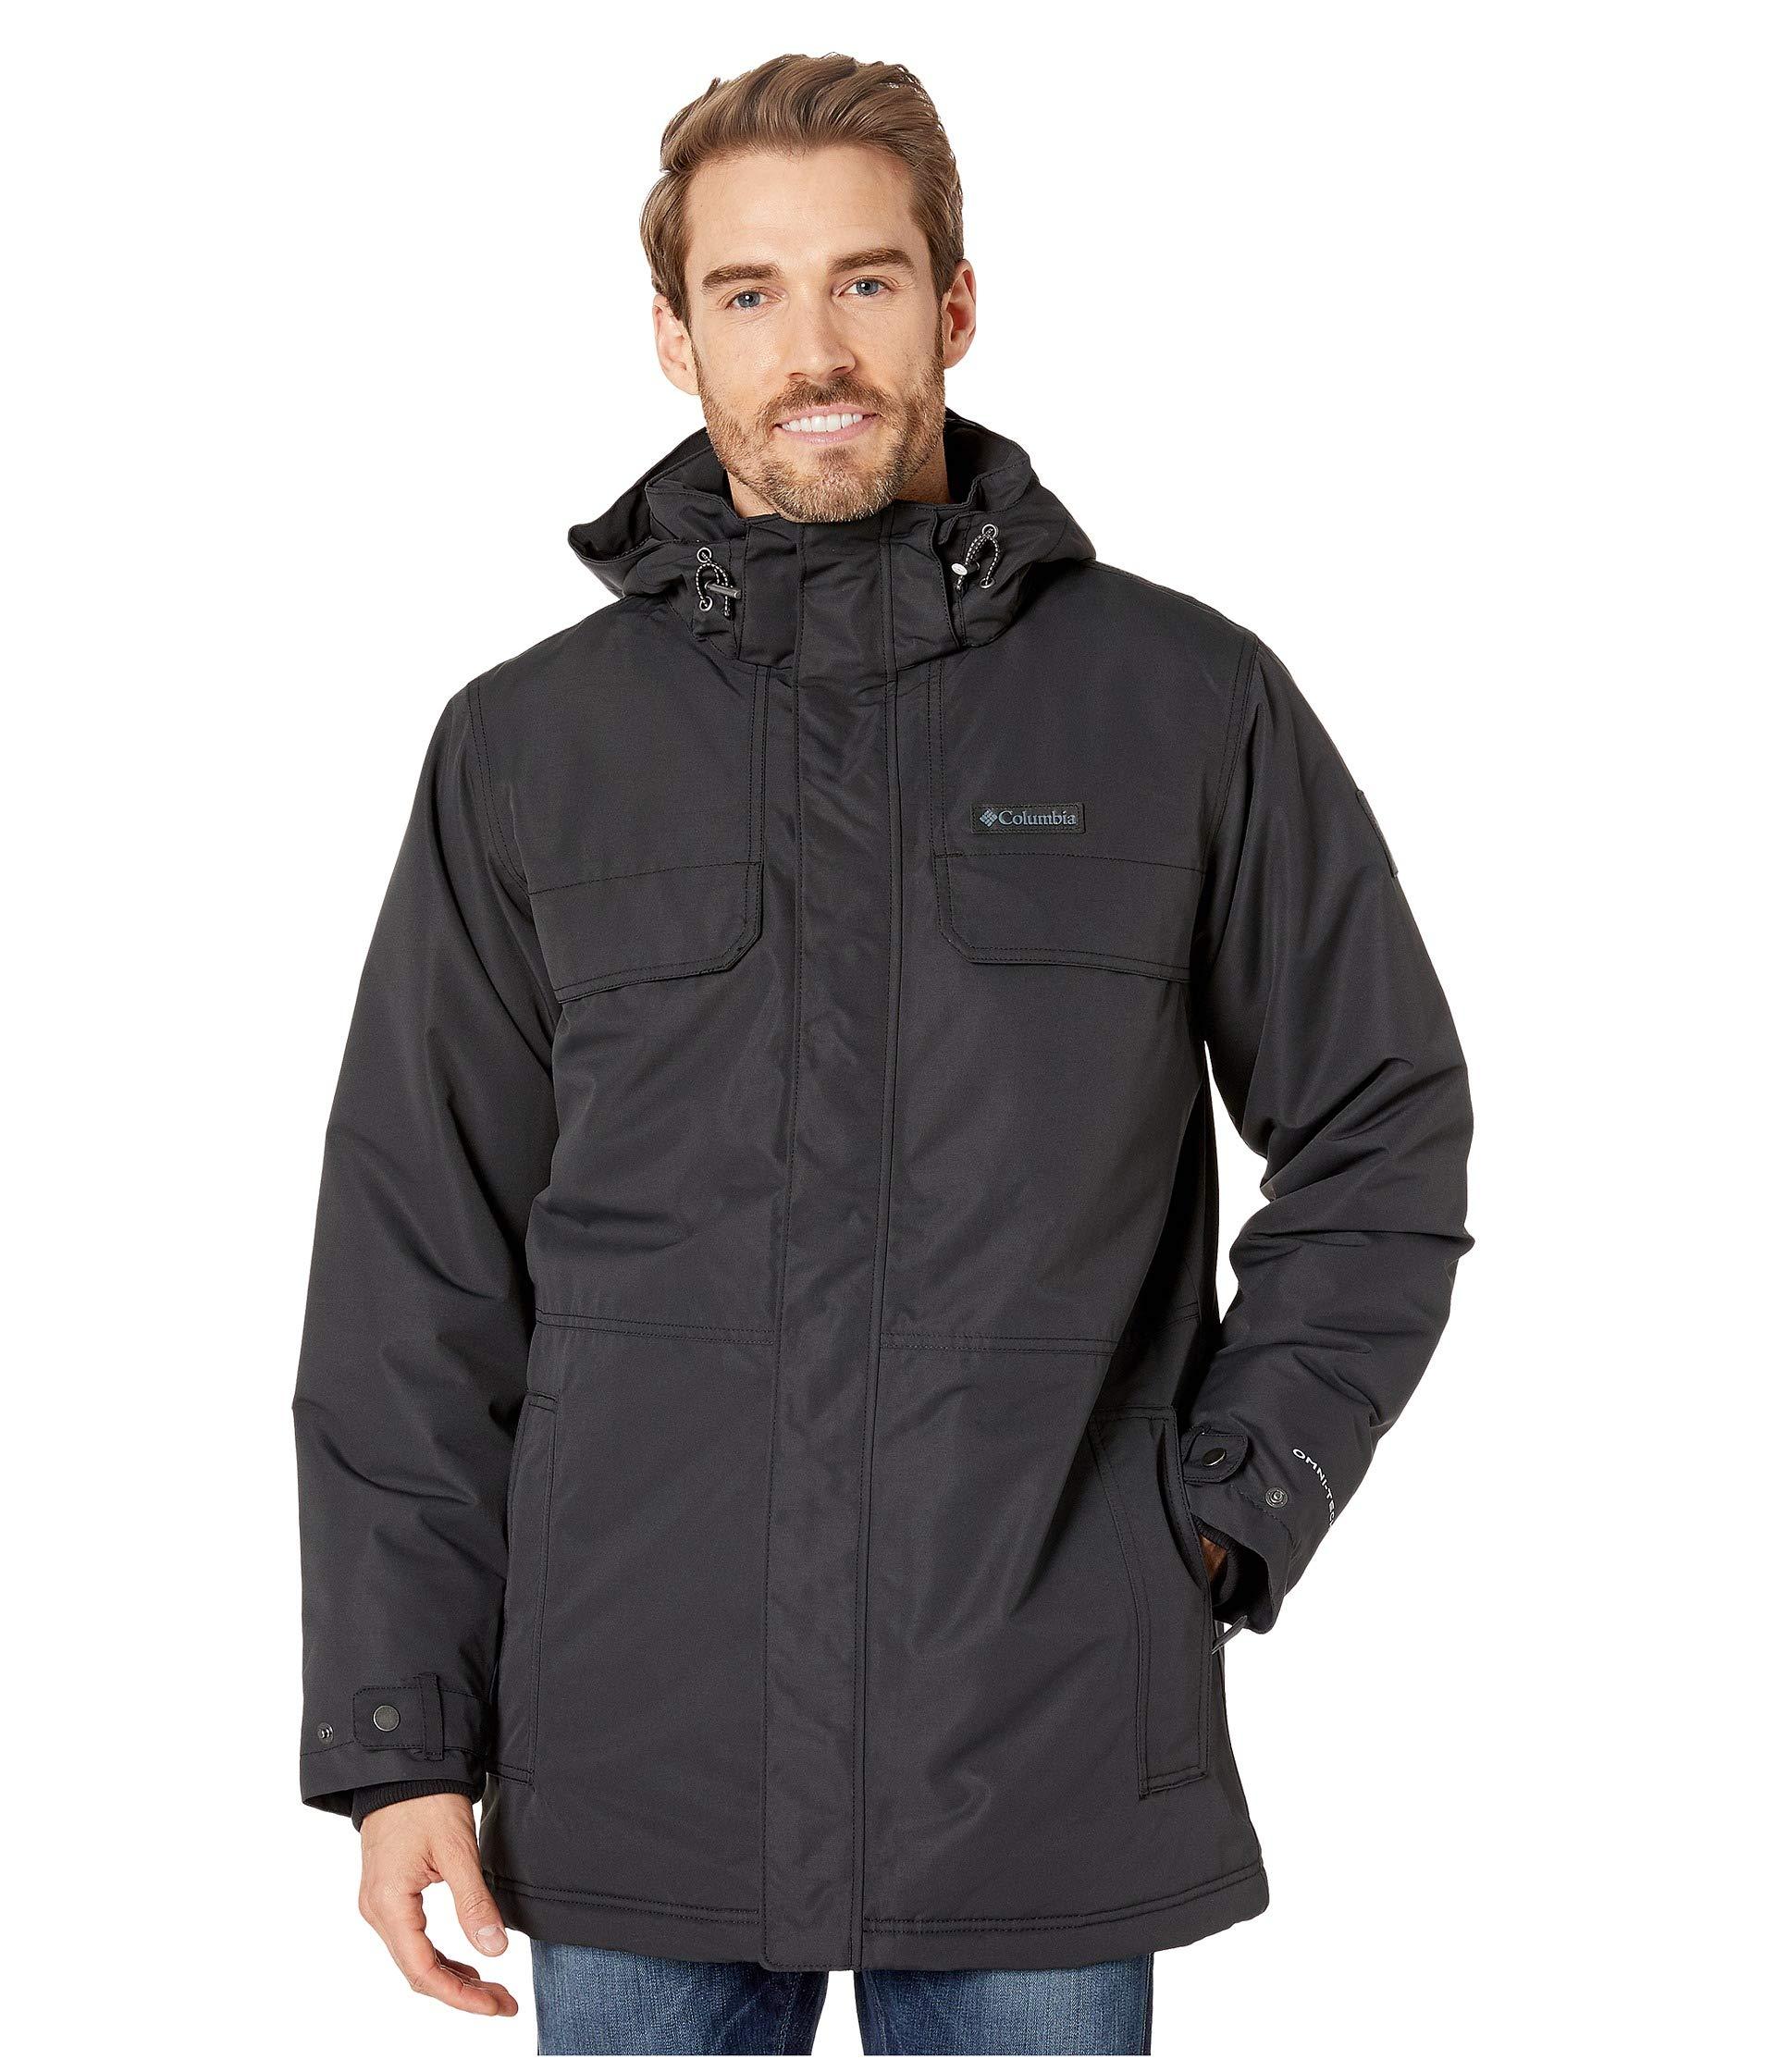 Columbia Synthetic Rugged Pathtm Parka in Black for Men - Lyst